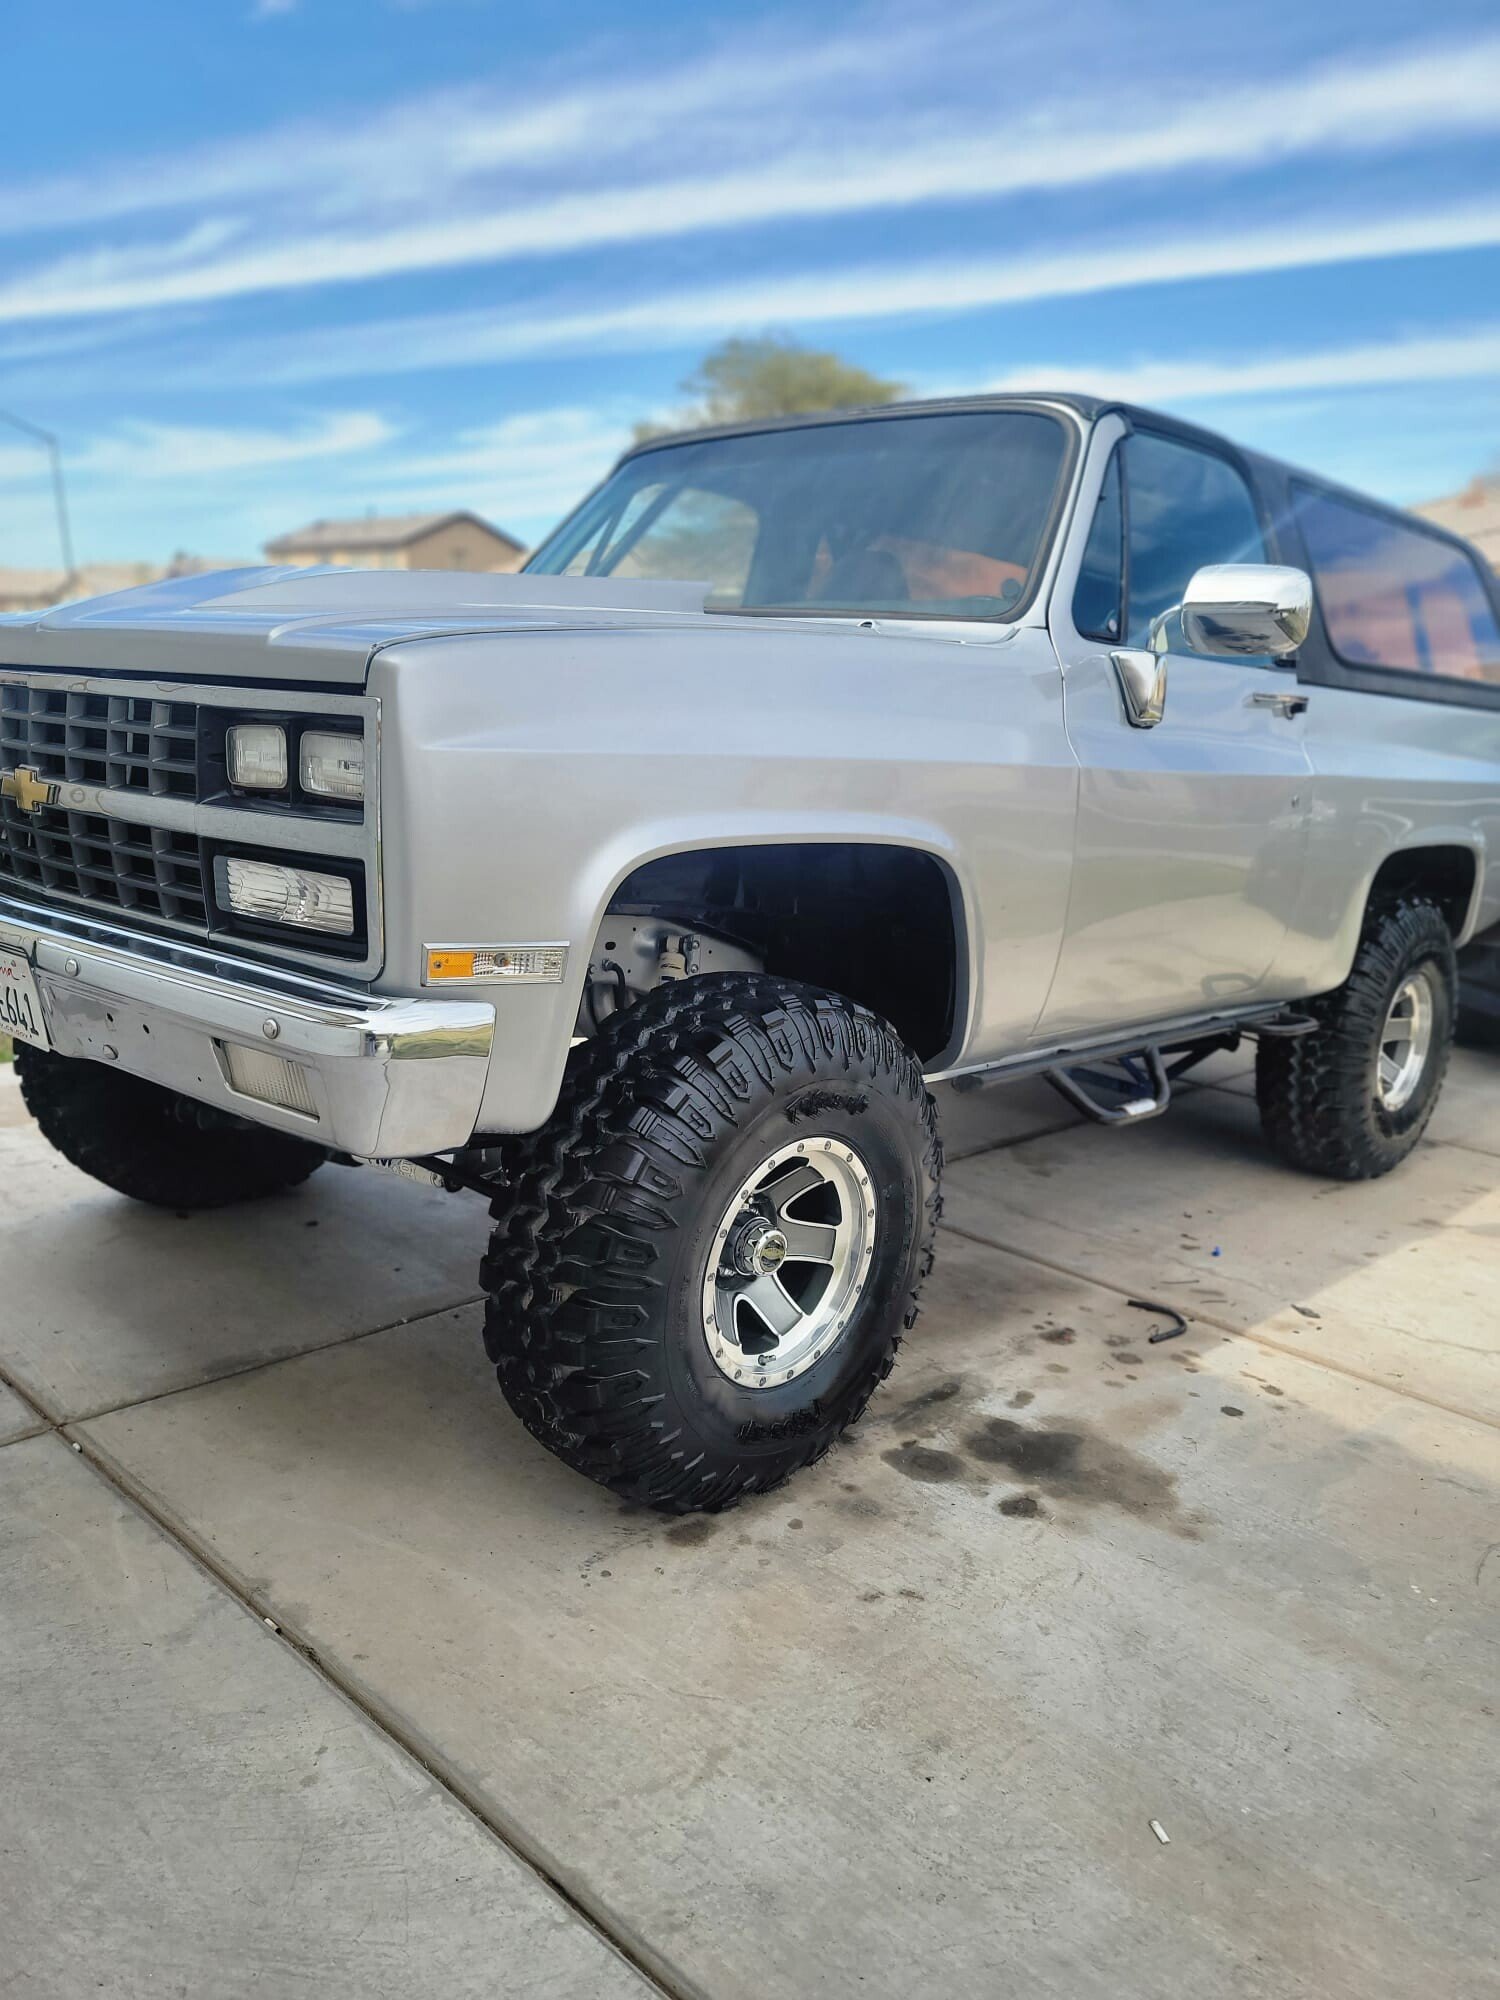 1975 Chevrolet Blazer Classic Cars For Sale Classics On Autotrader